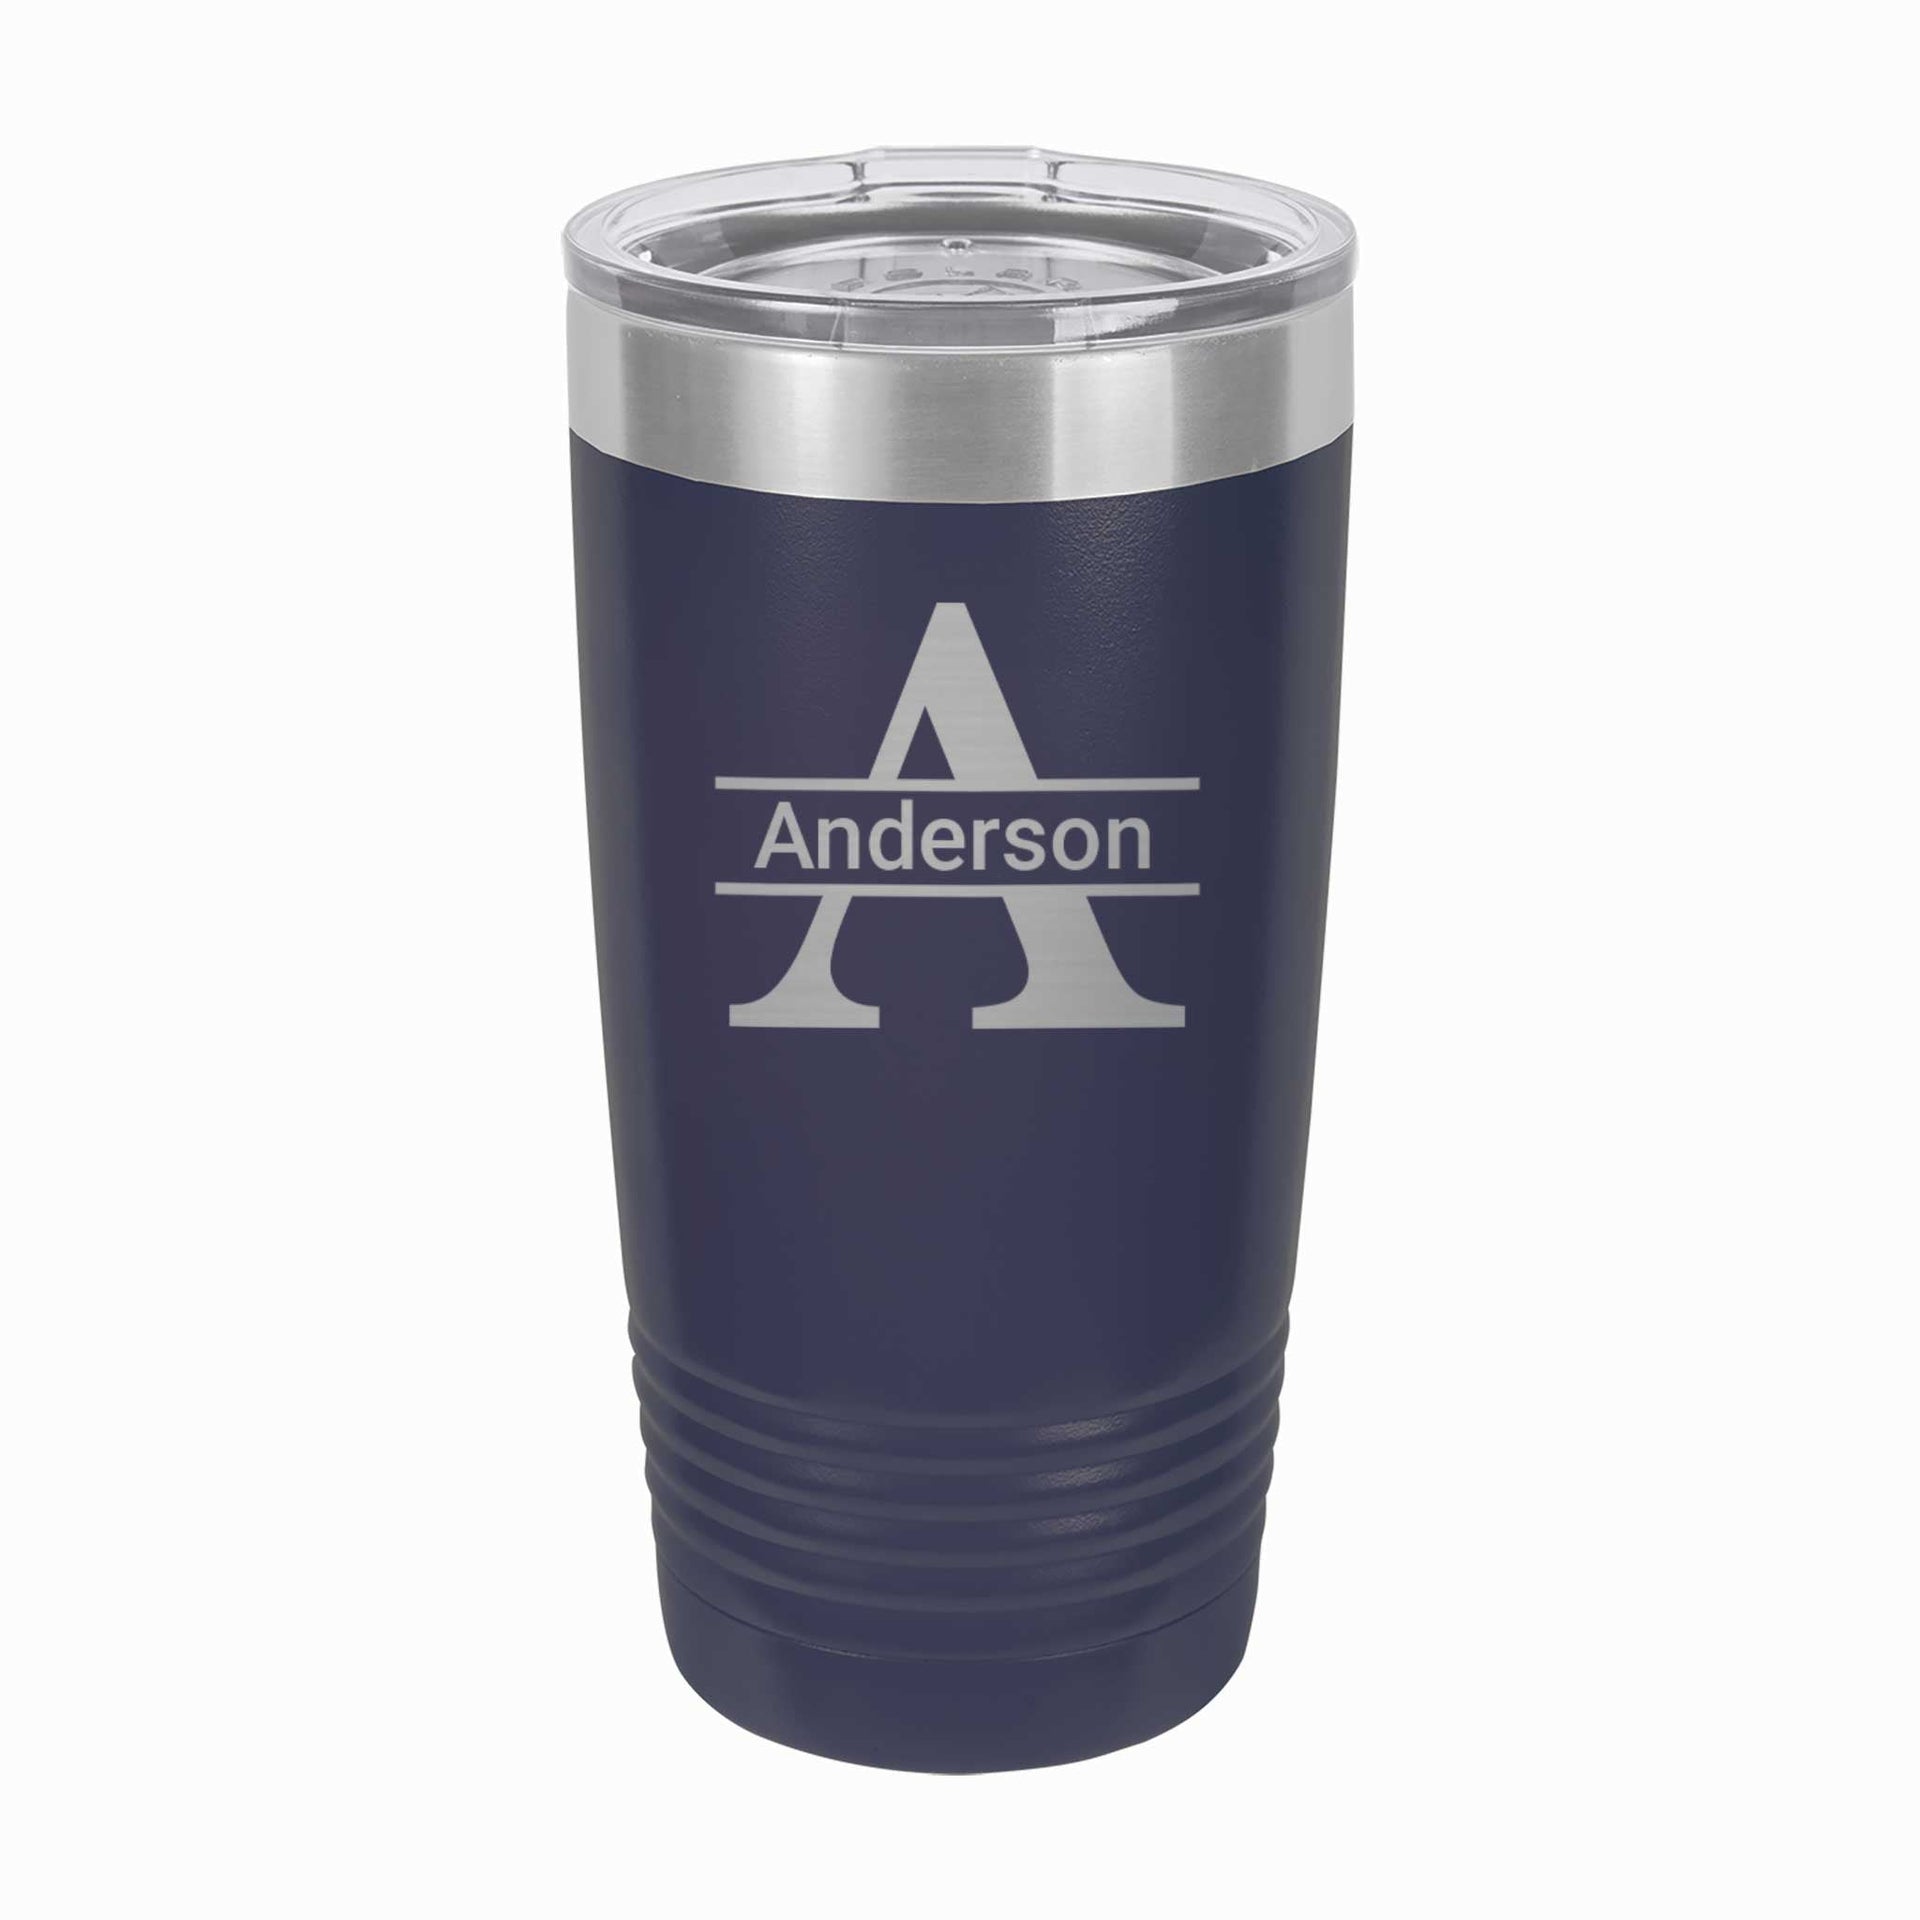 Personalized Steel Tumbler - Name & Initial - Mod Peach